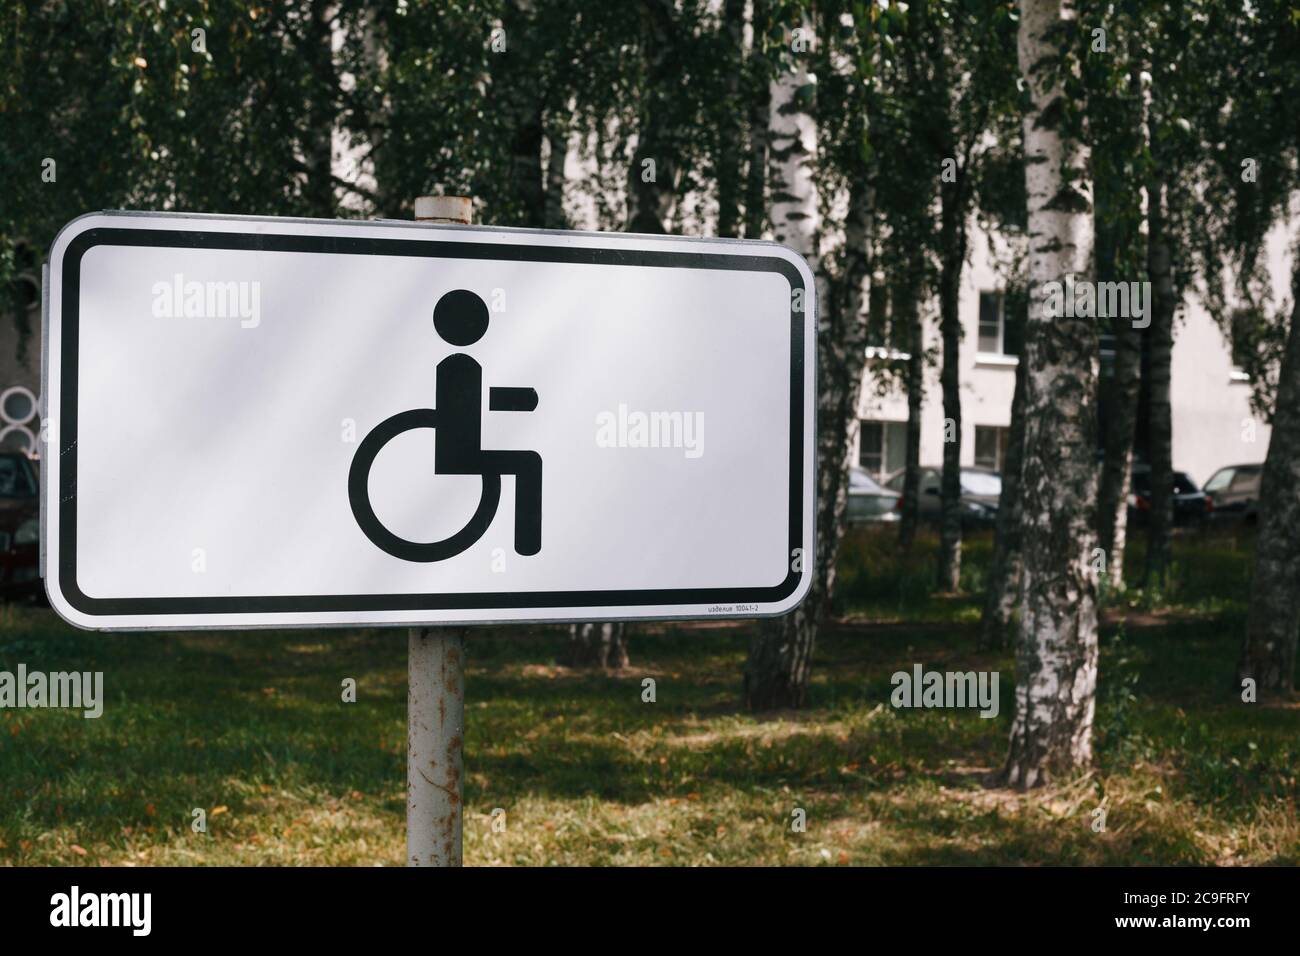 Disabled parking lot sign with residential building and birch trees on background Stock Photo